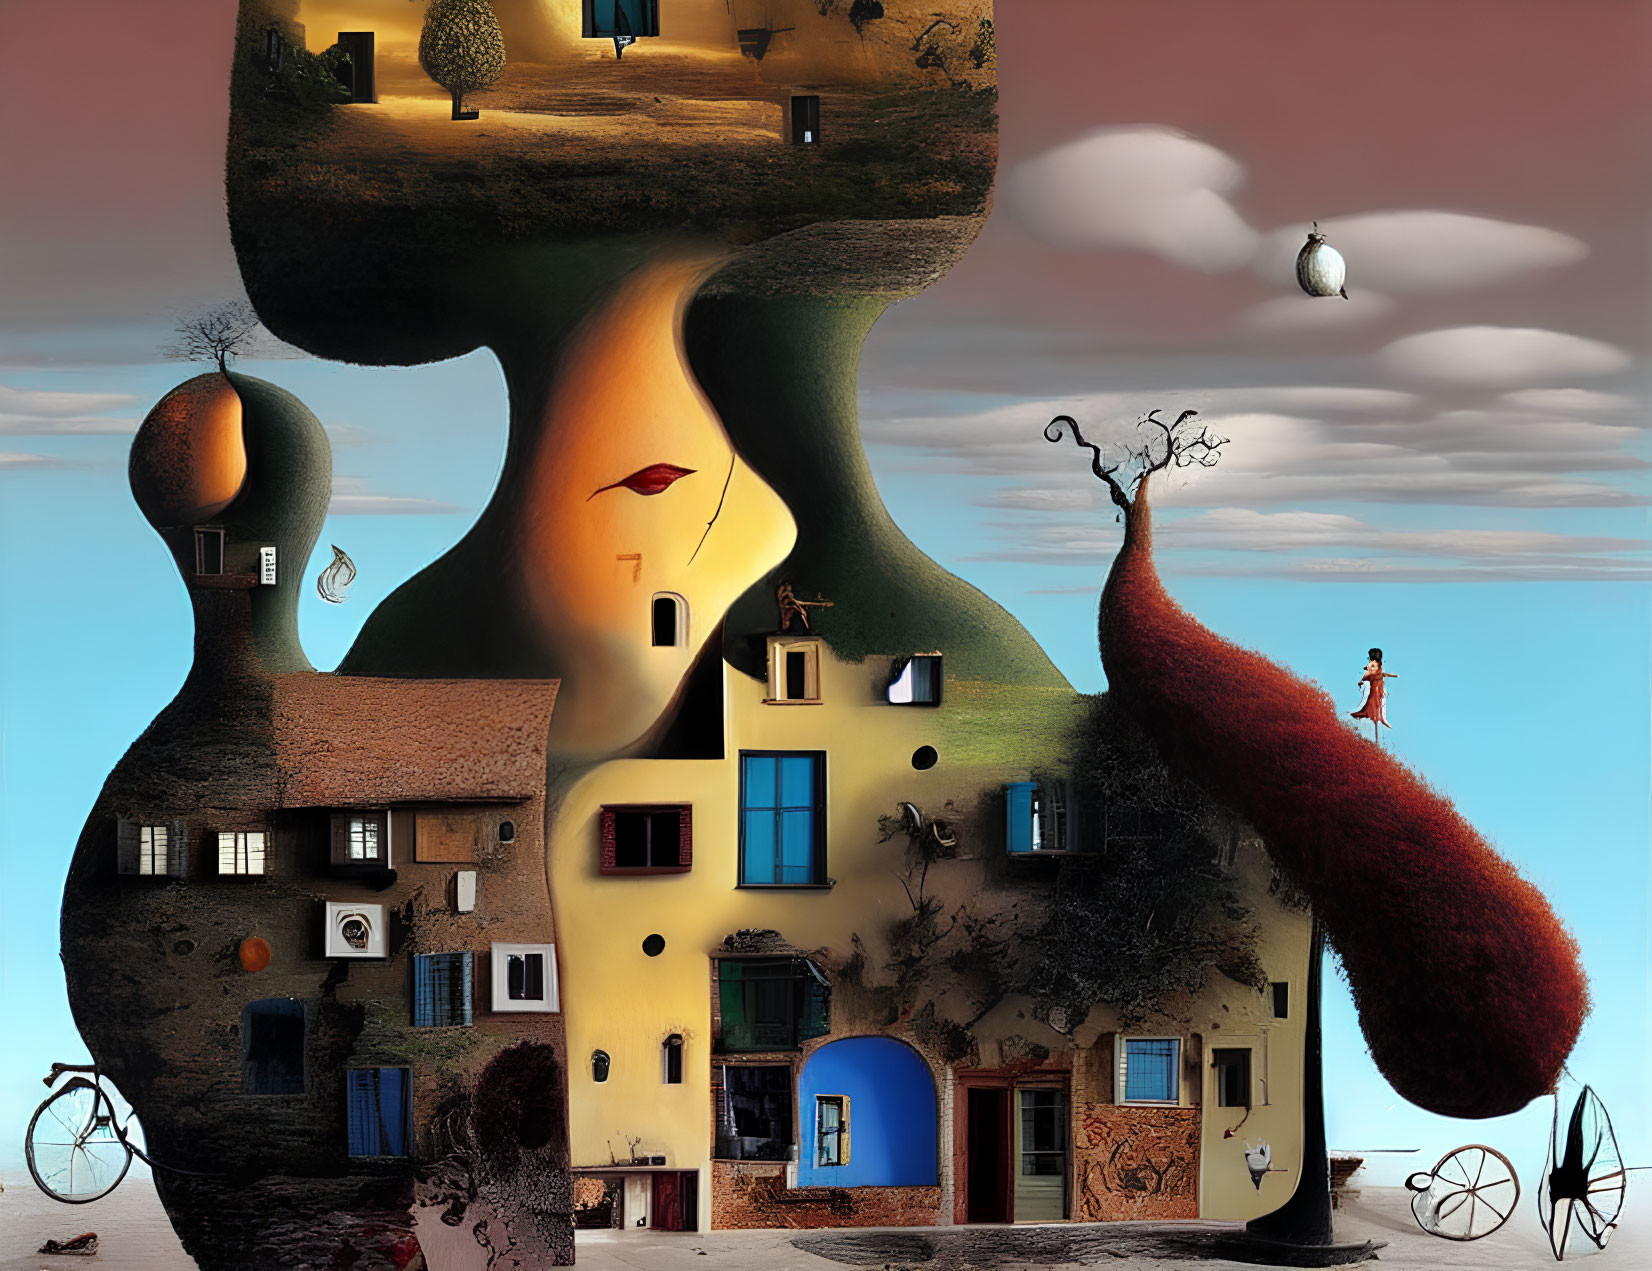 Surreal landscape featuring anthropomorphic hill, whimsical sky, and floating objects